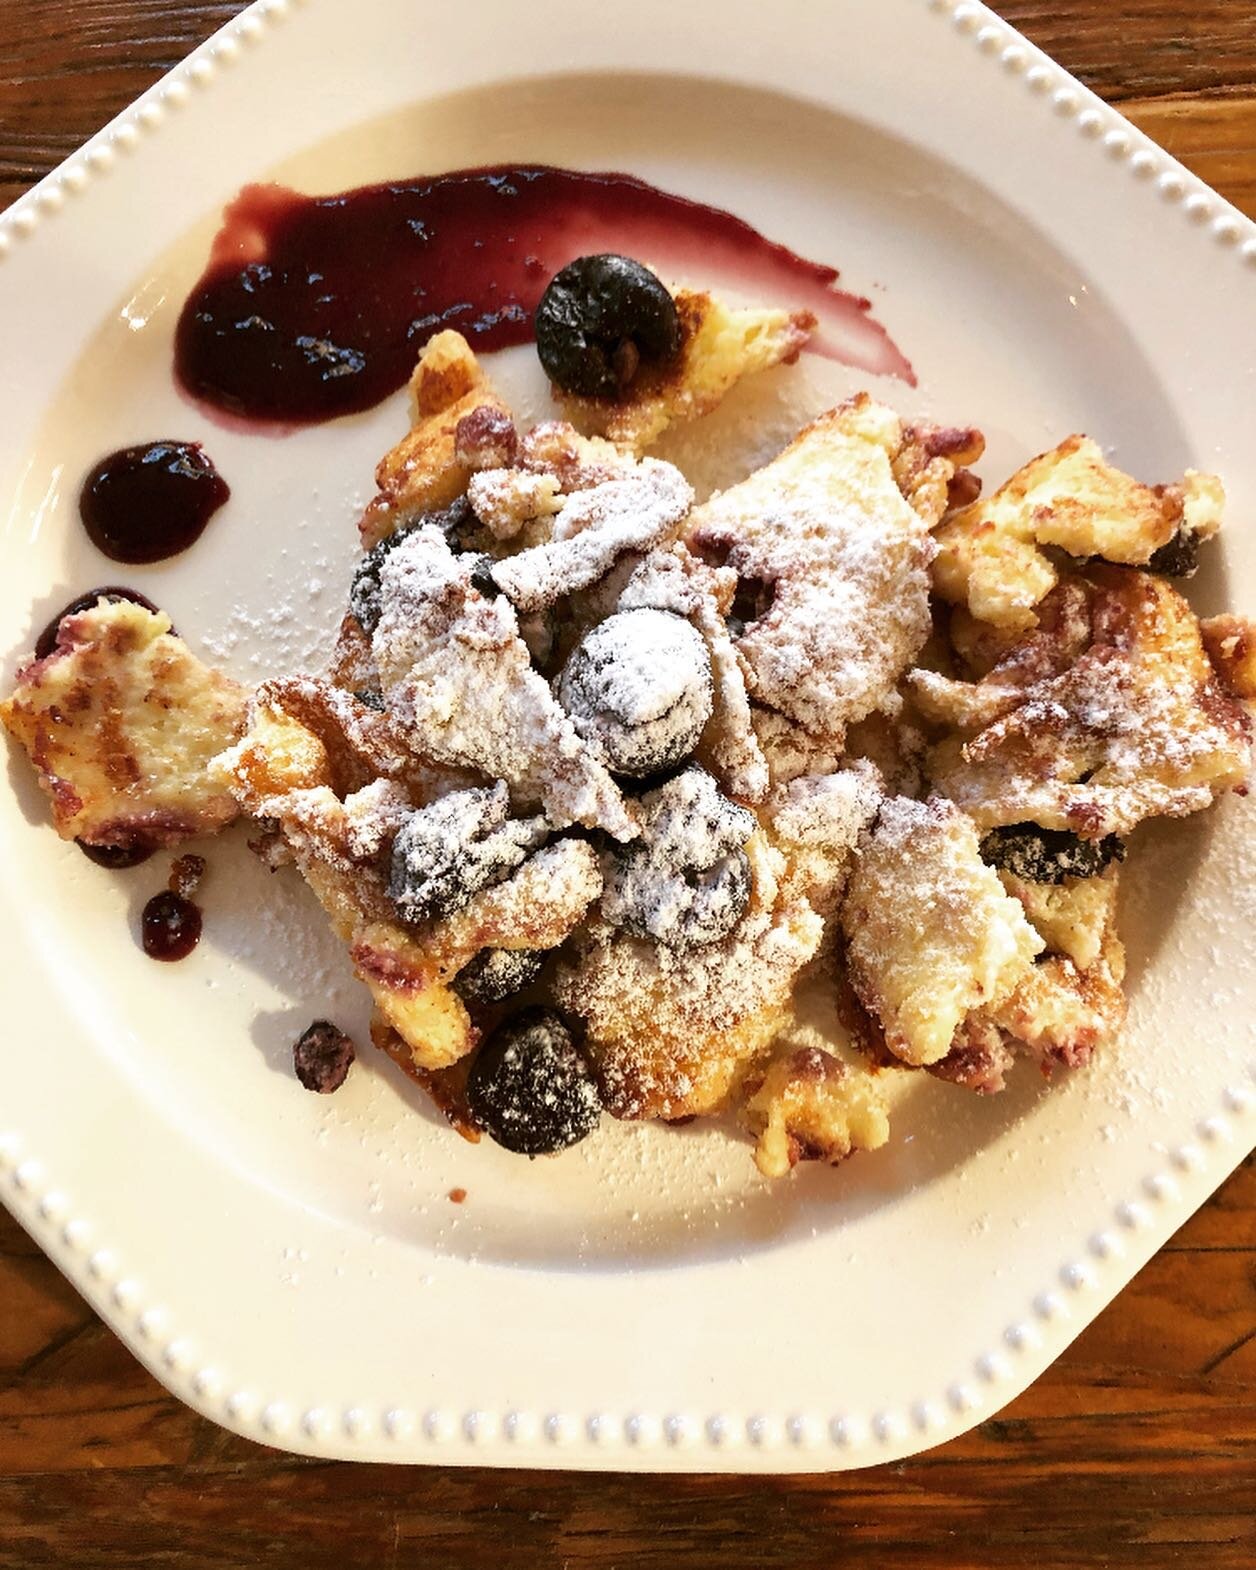 We&rsquo;re so excited for our specials this weekend!! Our kaiserschmarrn(German torn pancake)has returned with a cherry twist!! Get it with one of our amazing drink specials, we have the Mango Chico back and Mimosas!! Perfect for this holiday weeken